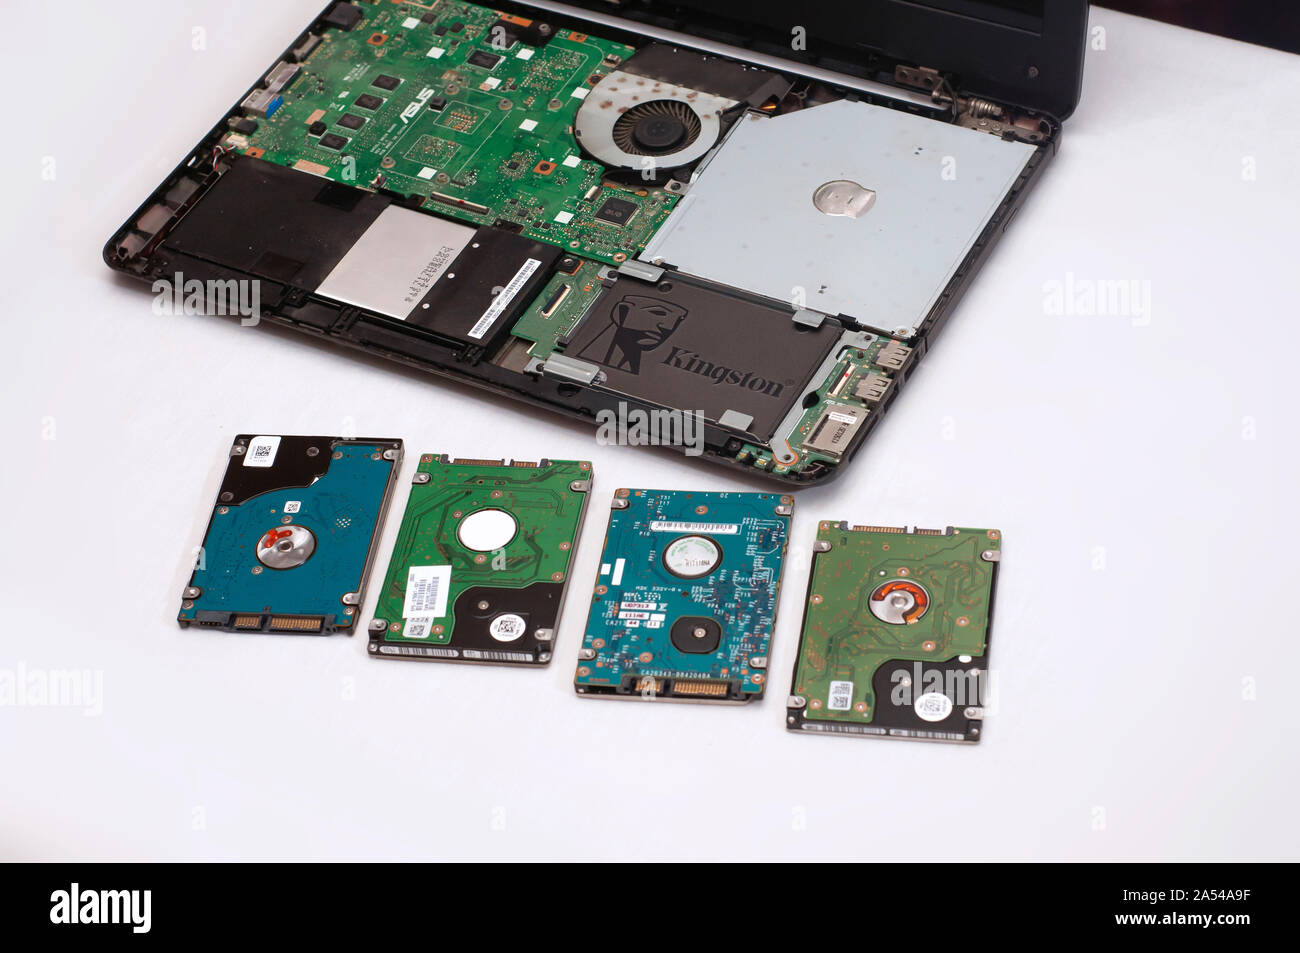 A pile of used HDD next to an open disassembled laptop or notebook computer with an SSD replaced. Stock Photo